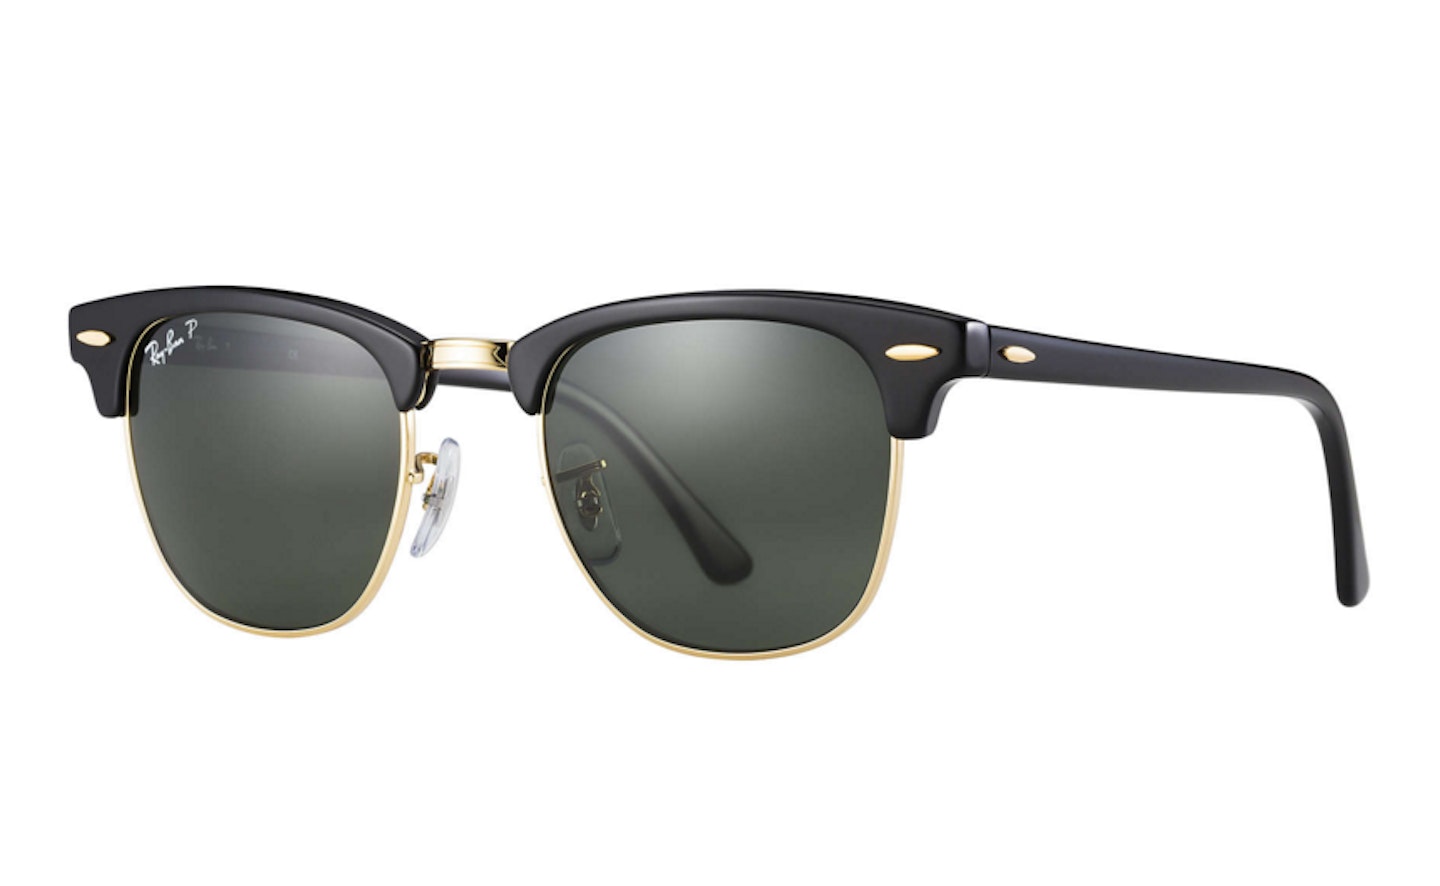 Ray-Ban: The History Of The World's Most Iconic Sunglasses Brand ...